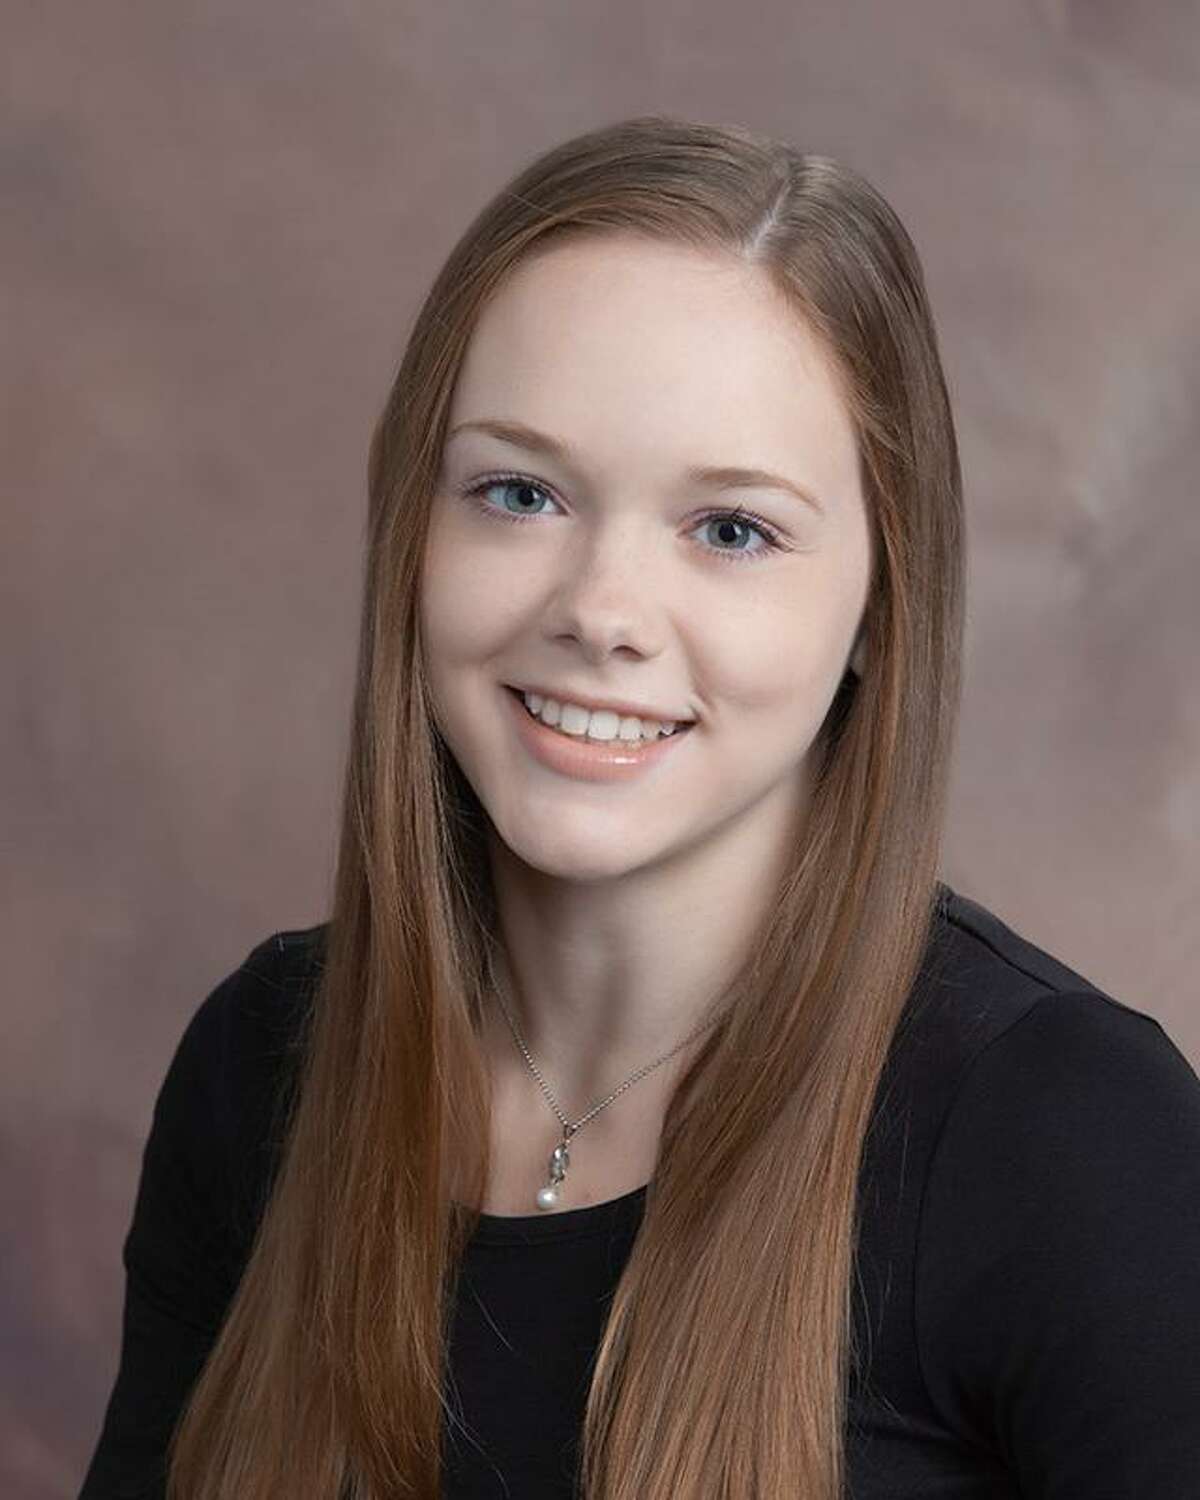 Mercy High School student Madeline Richardson is co-salutatorian of the class of 2019 in Middletown.